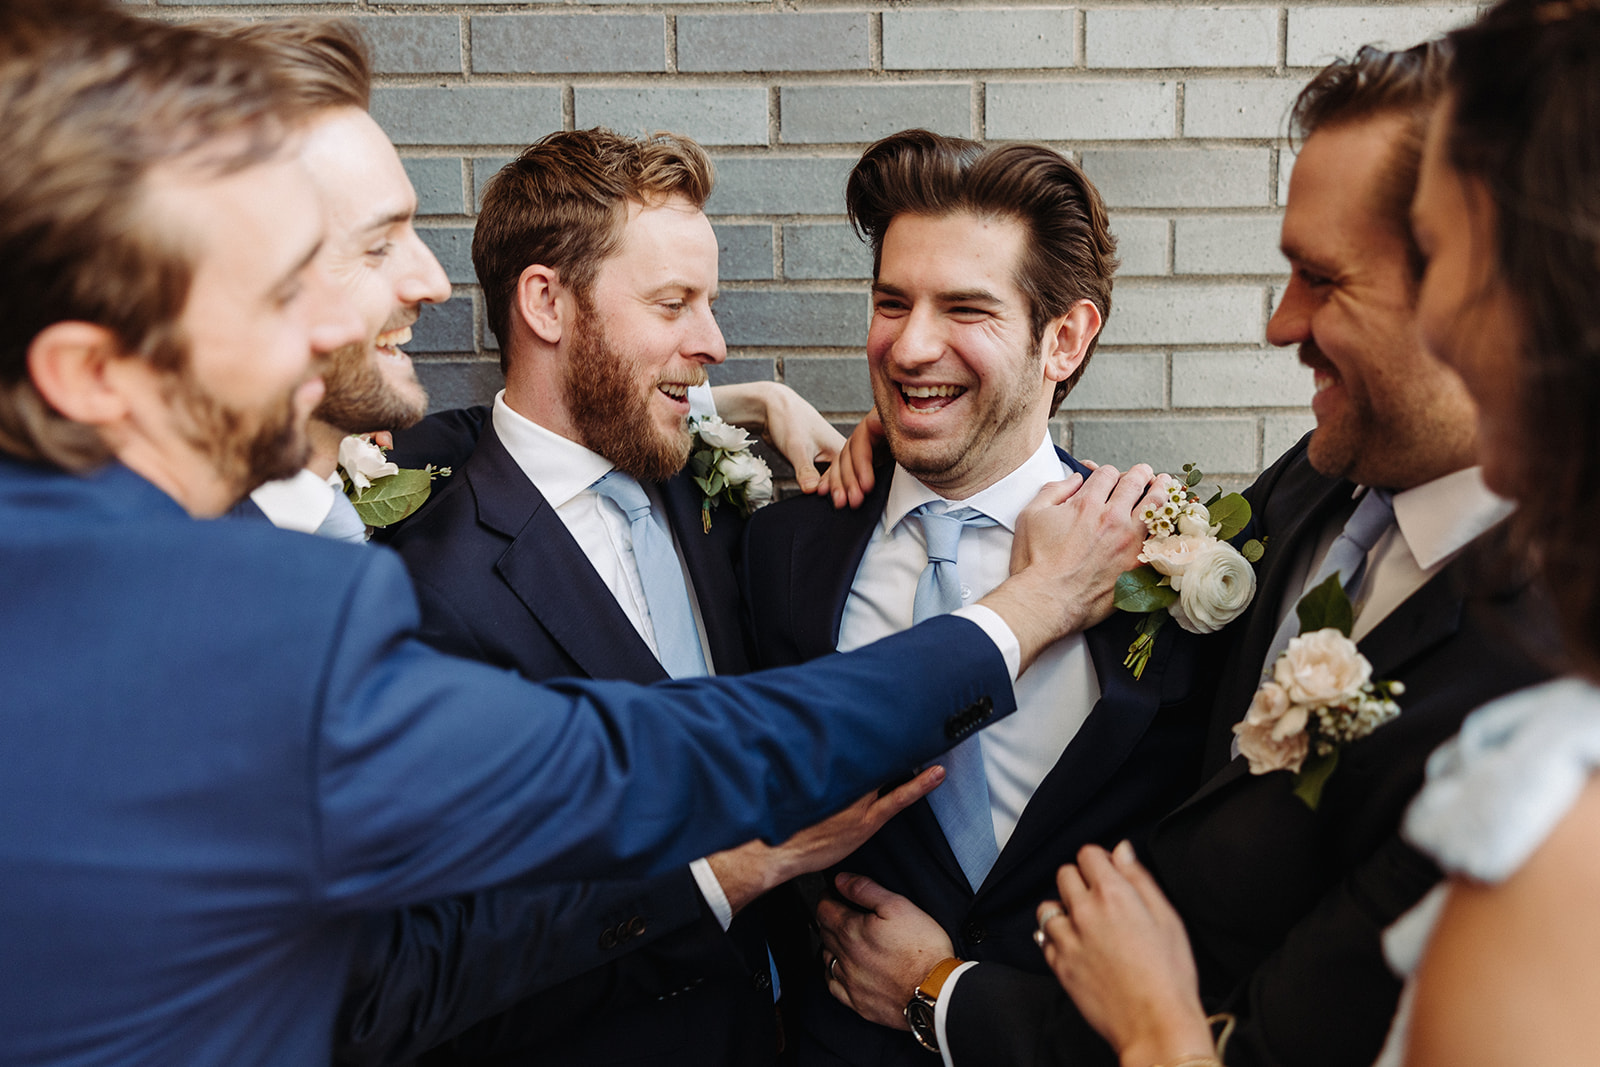 Wedding party celebrating with groom